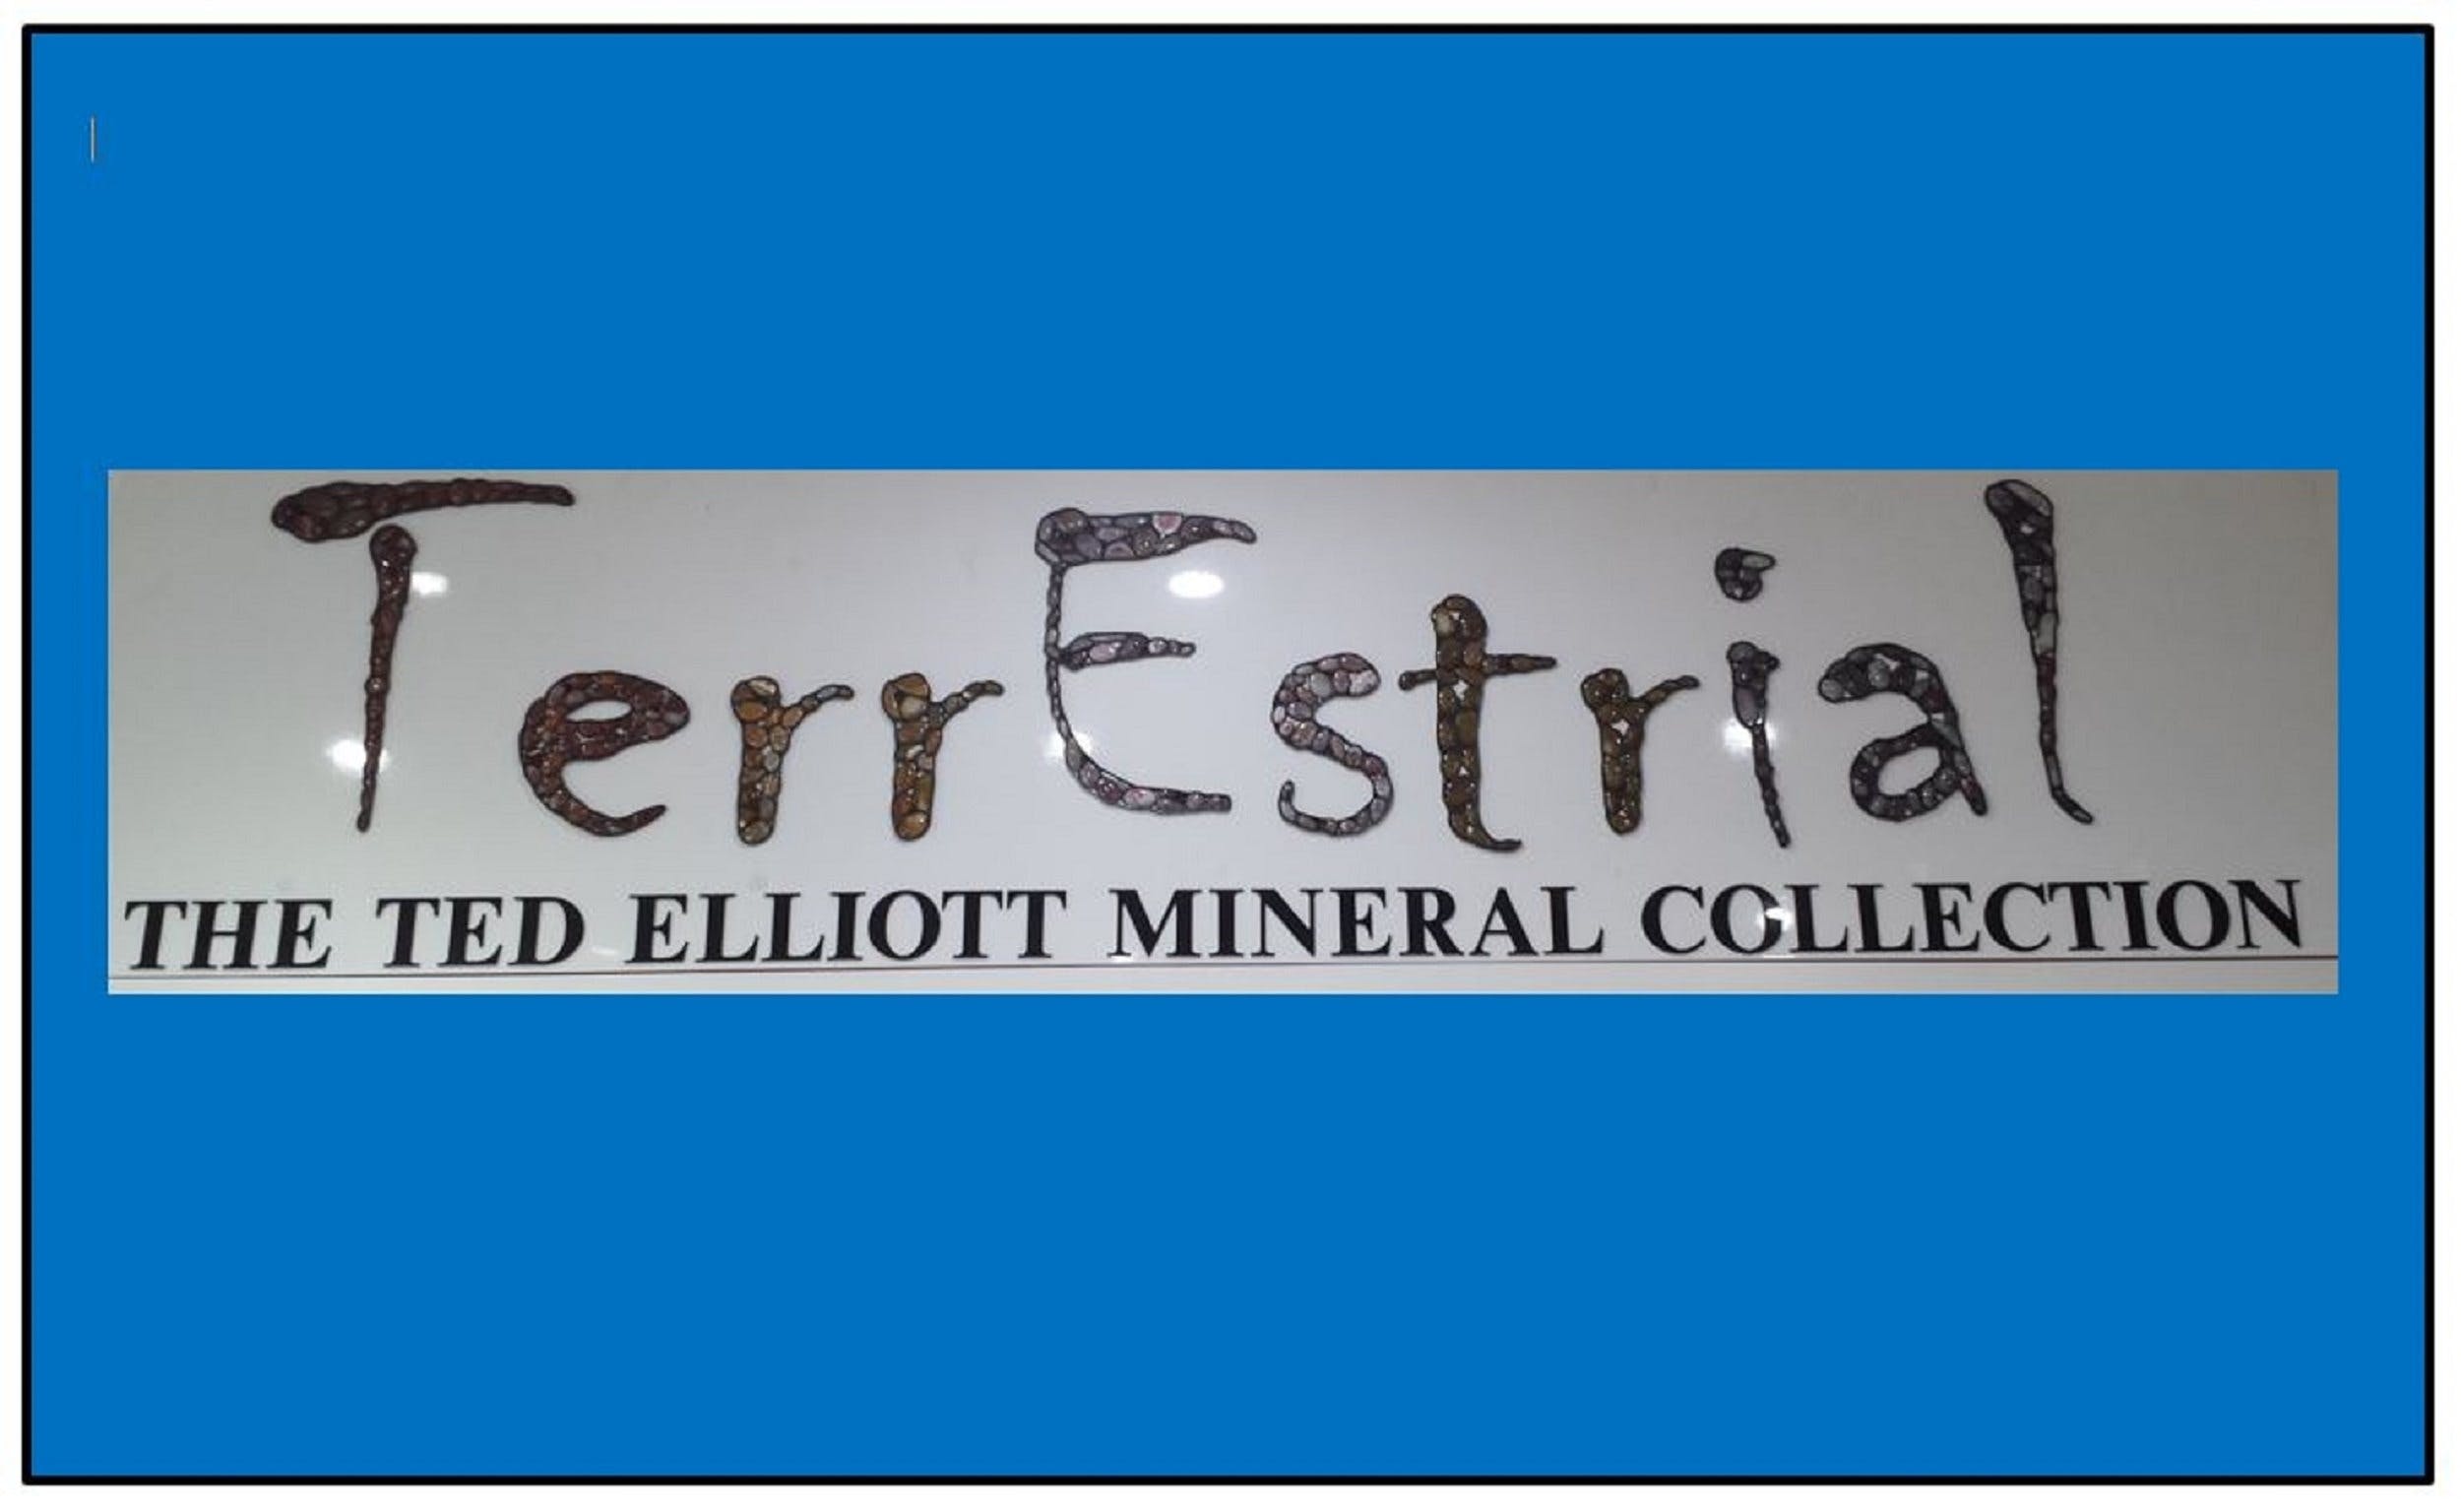 The Ted Elliott Mineral Collection